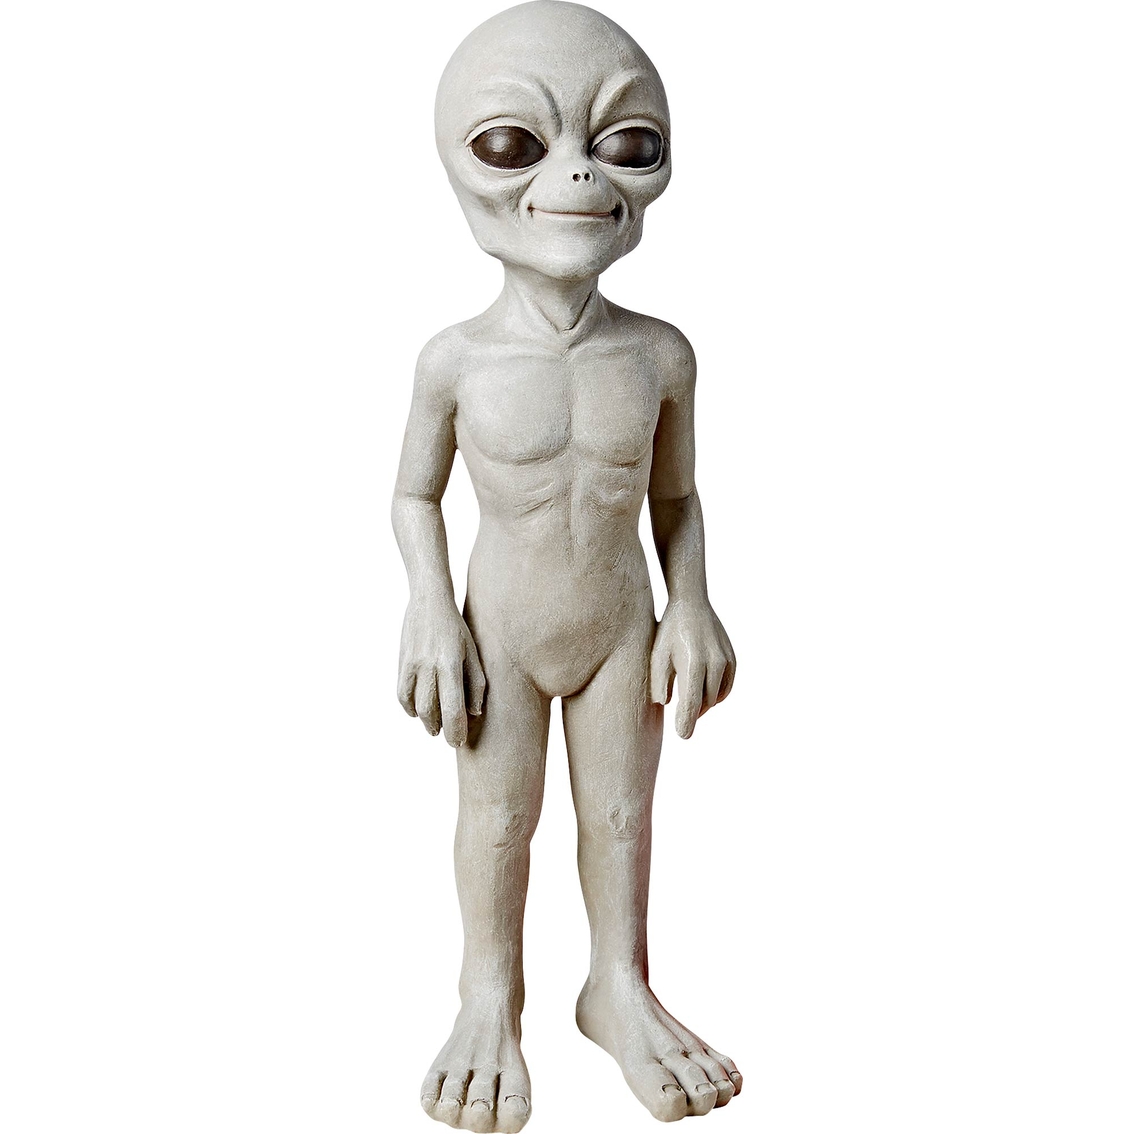 Design Toscano The Out-of-this-World Alien Extra Terrestrial Statue: Small - Image 2 of 4